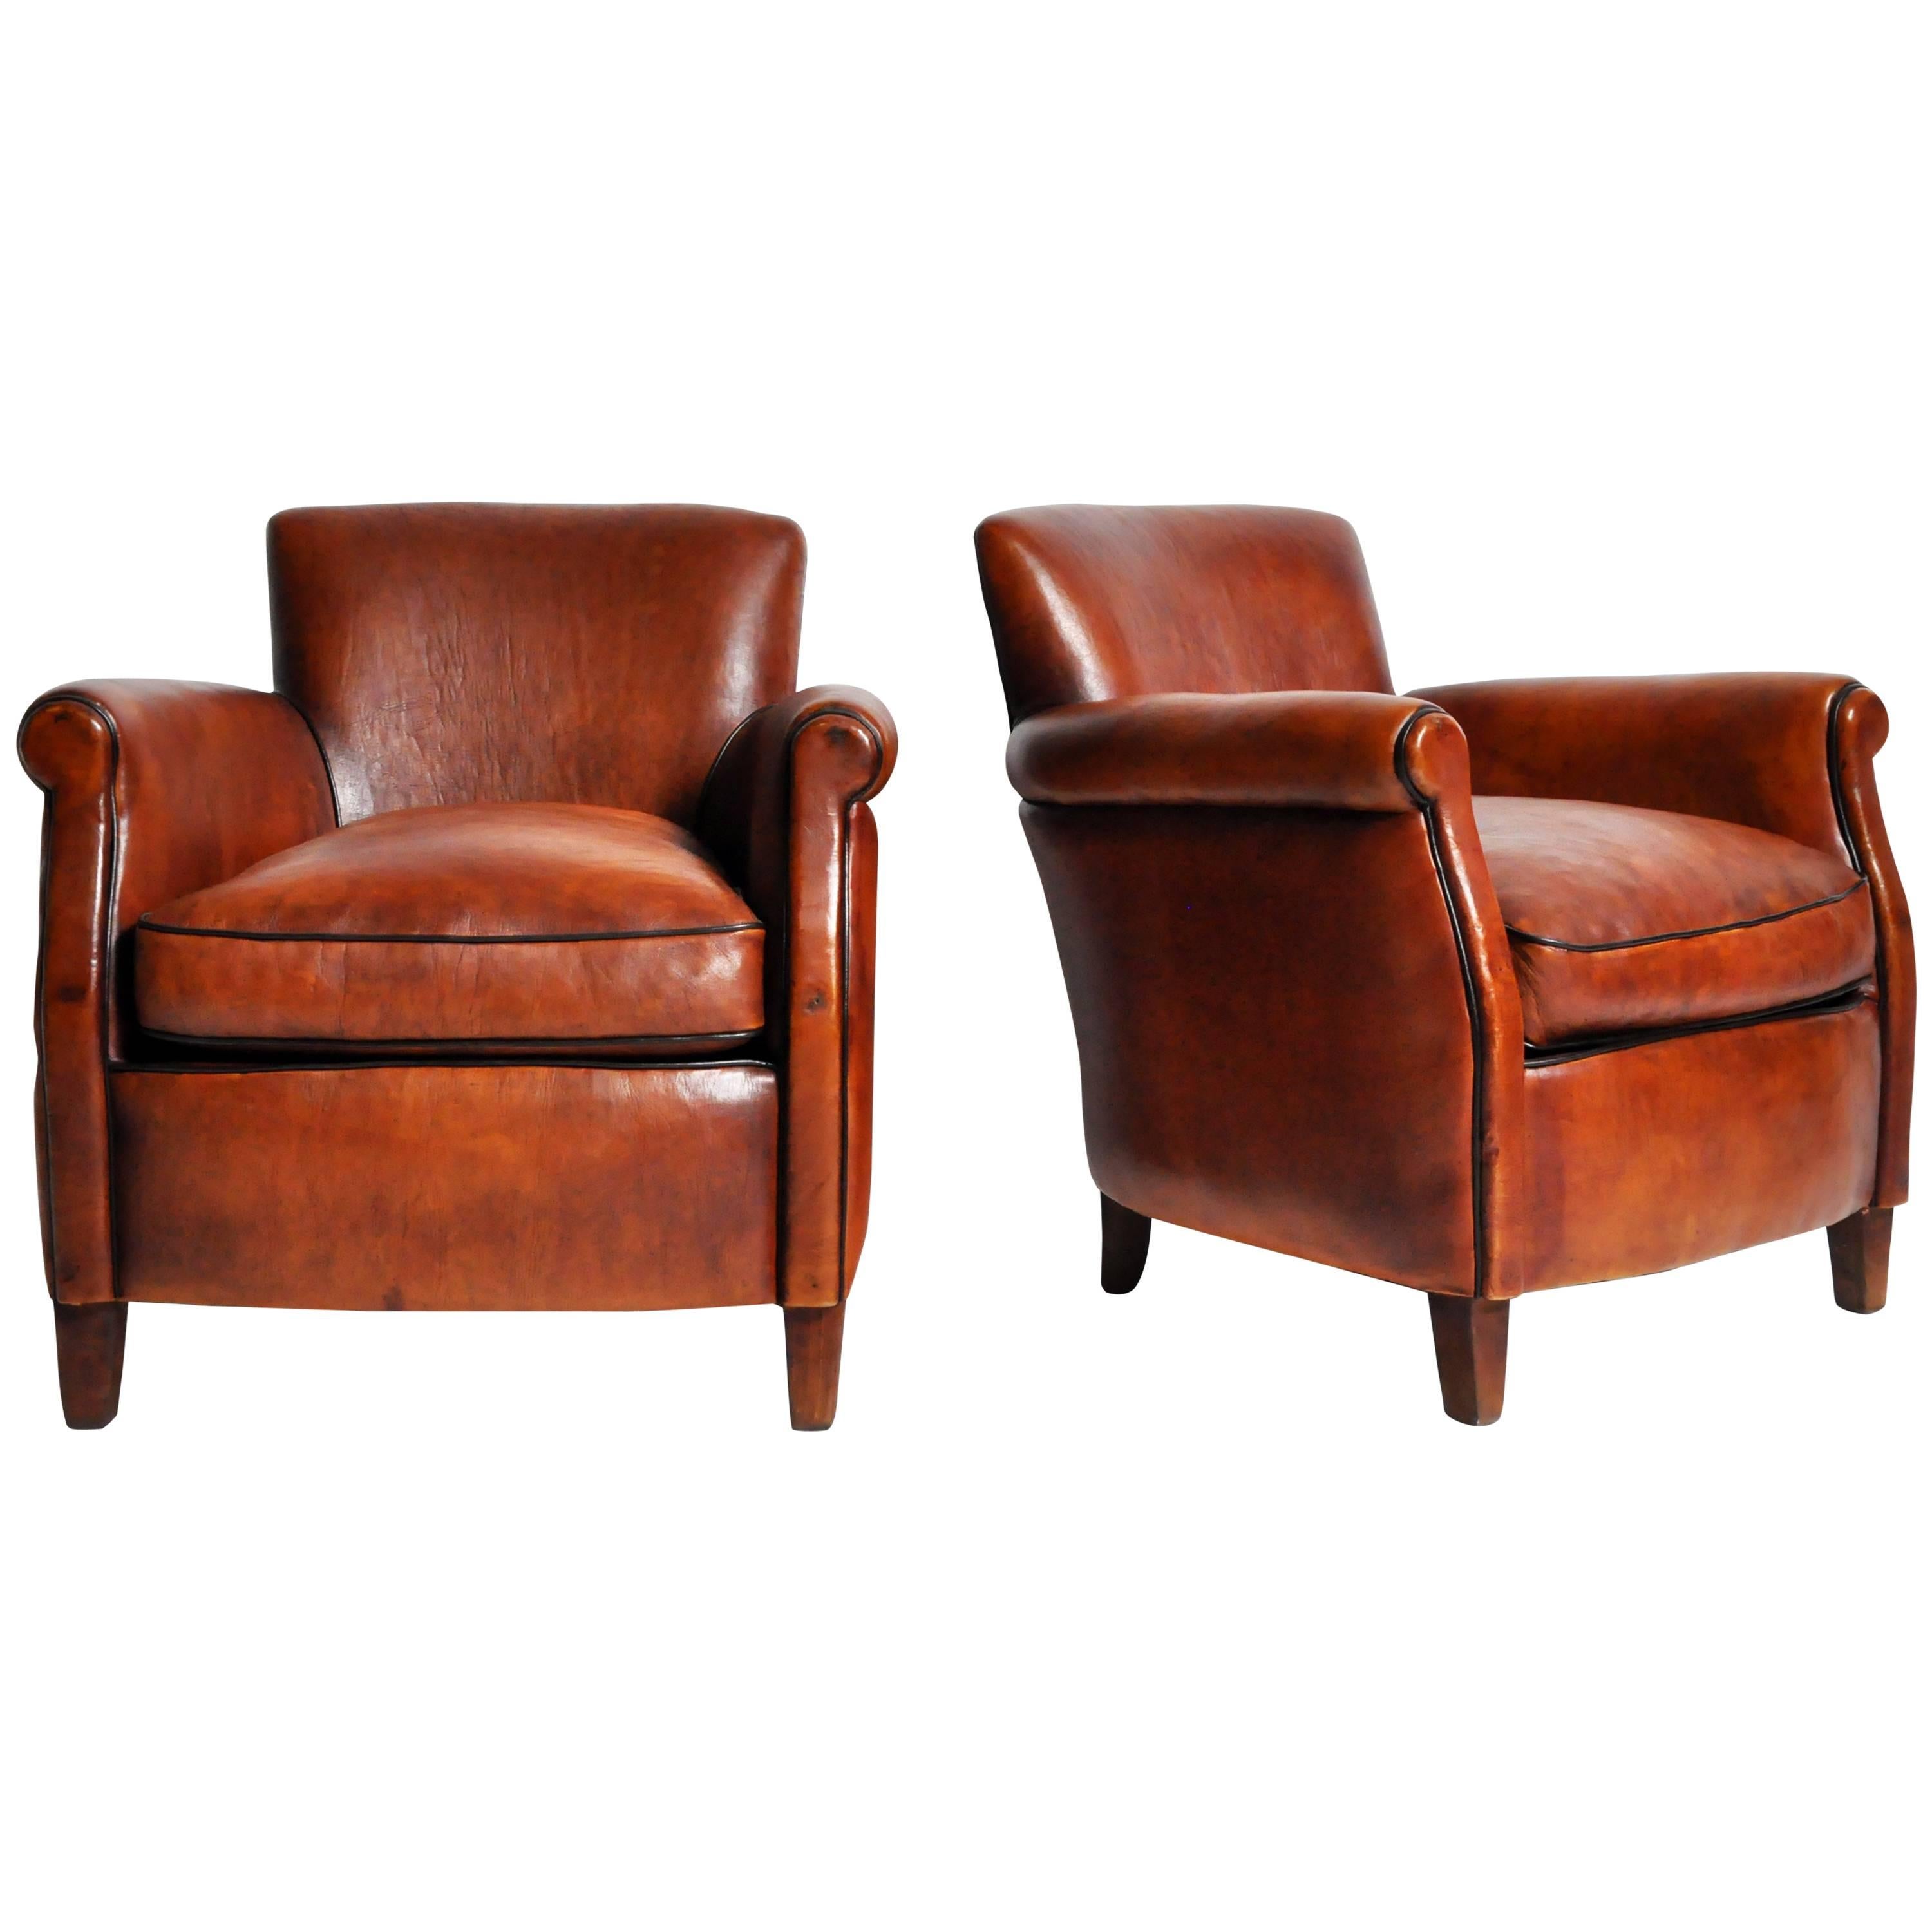 Pair of Parisian Brown Leather Club Chairs with Dark Brown Piping